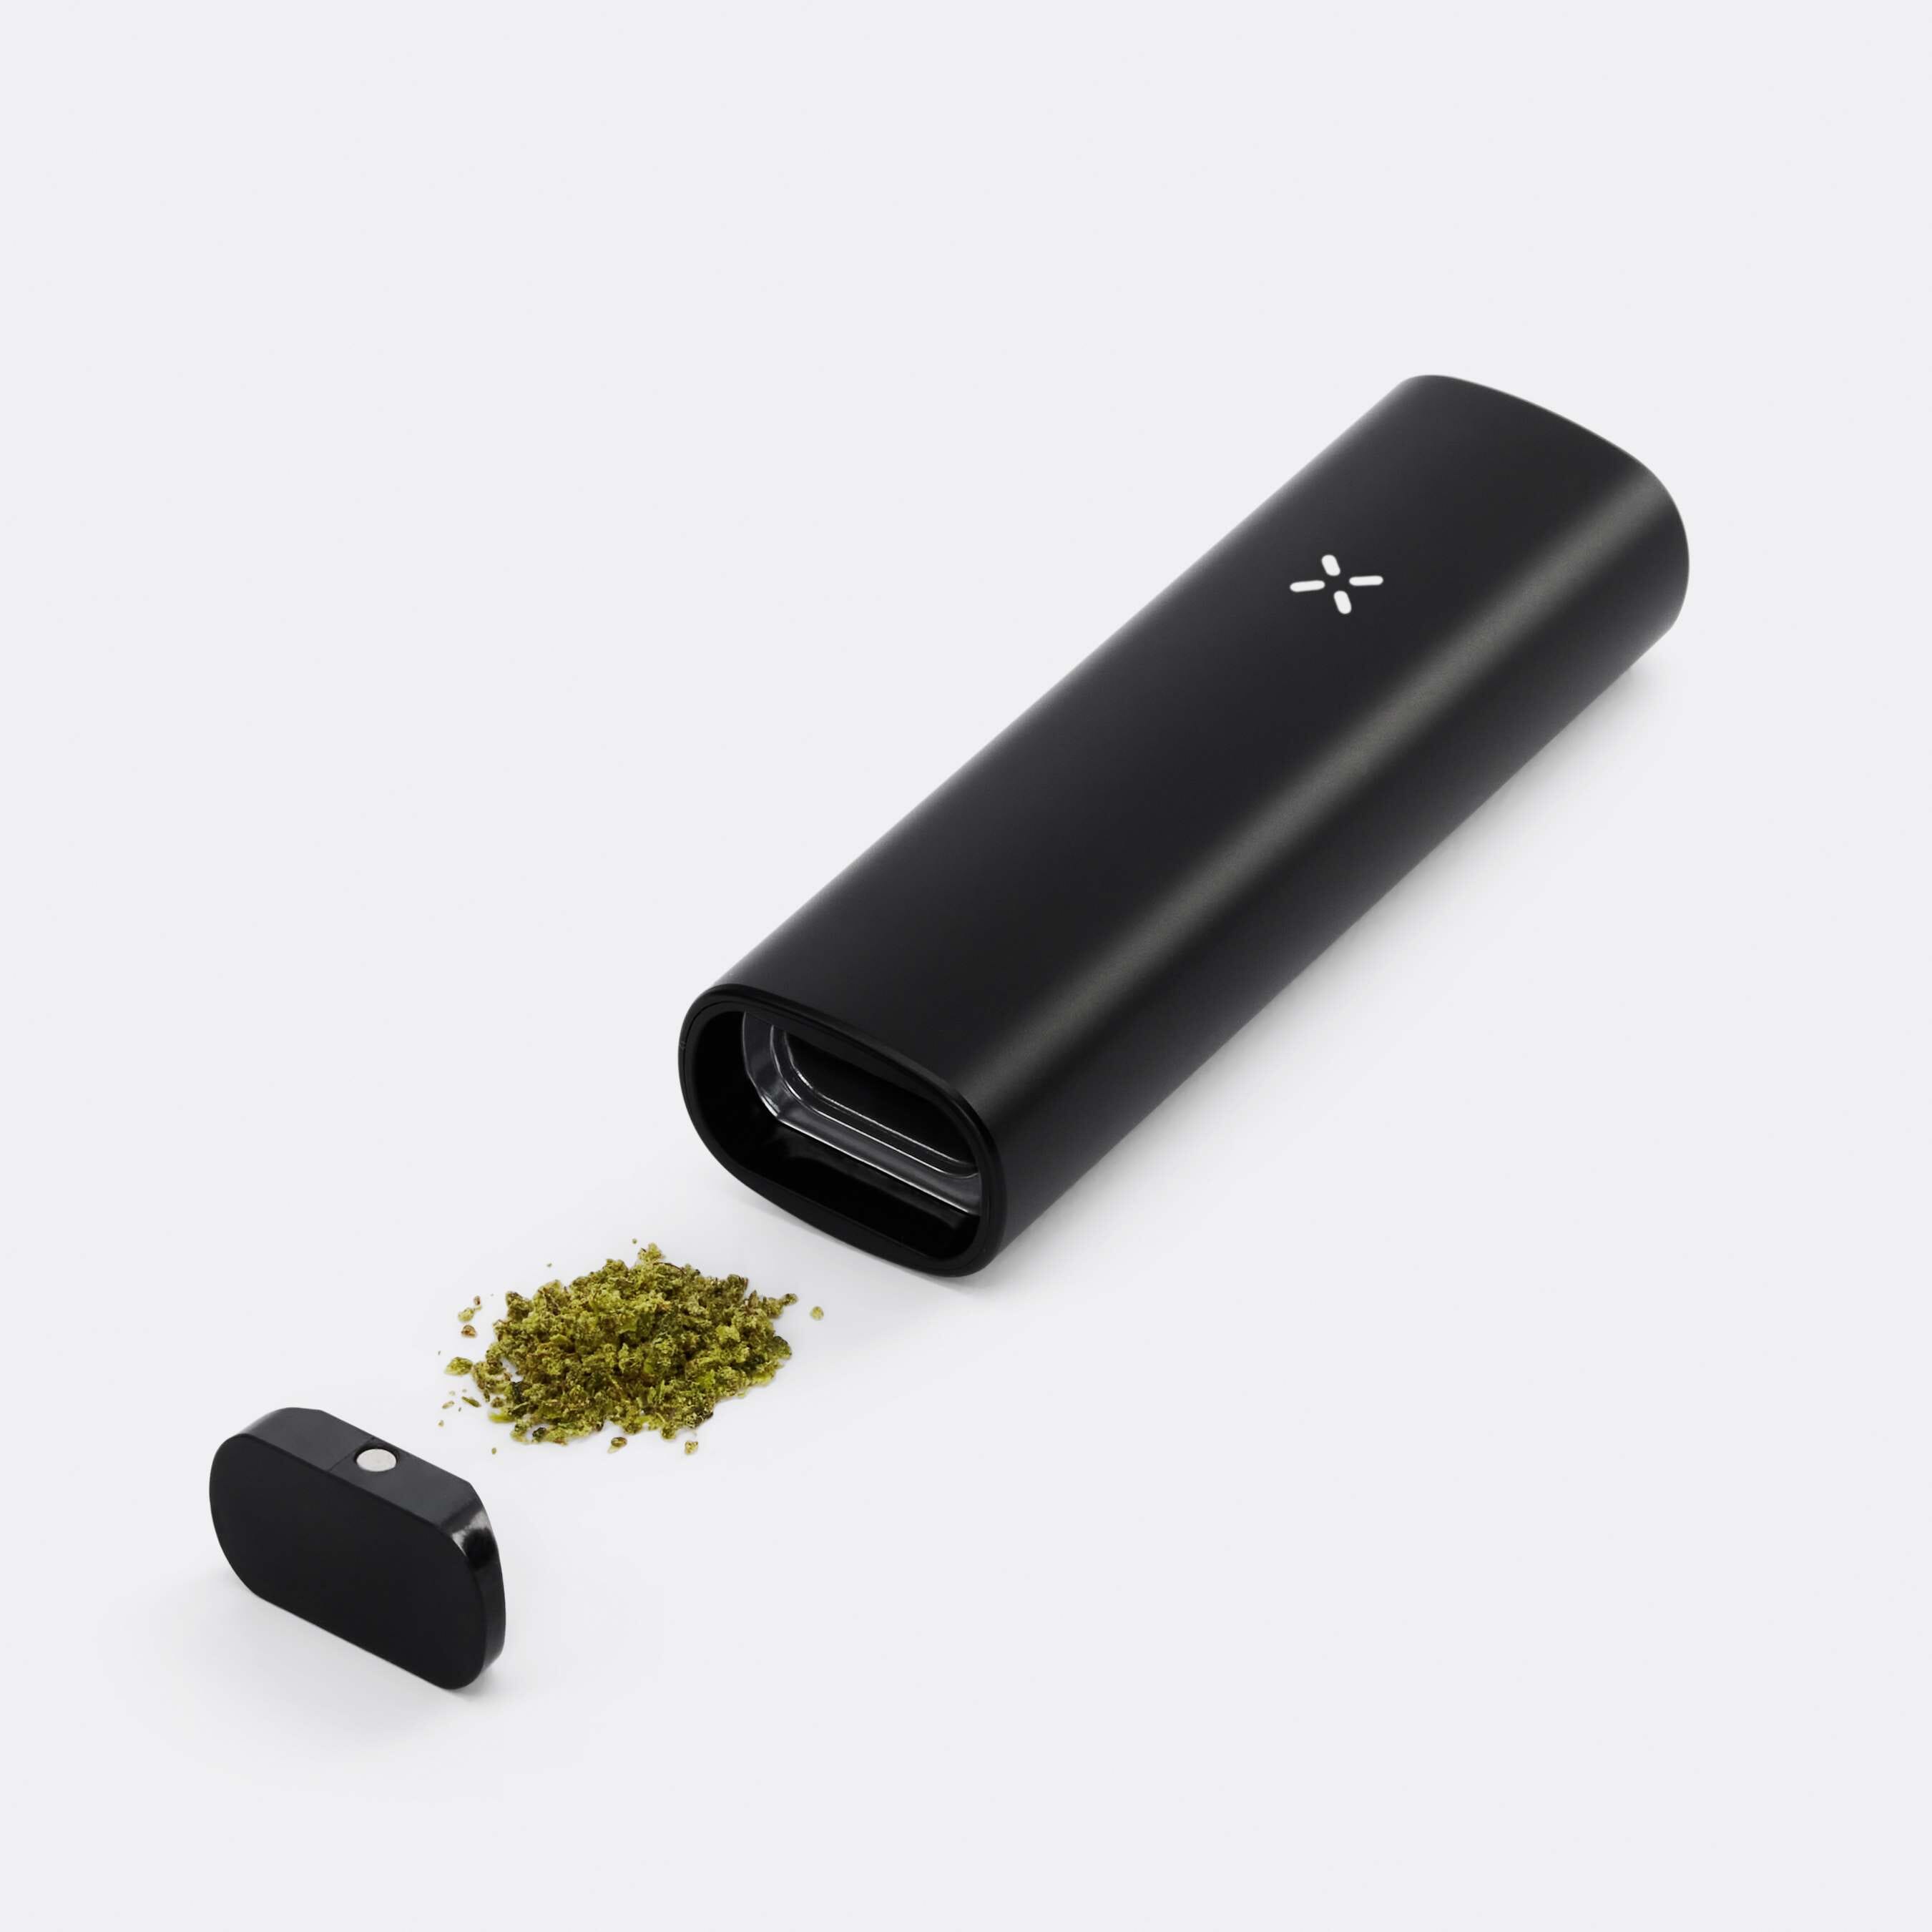 Loading the Pax Plus heating bowl